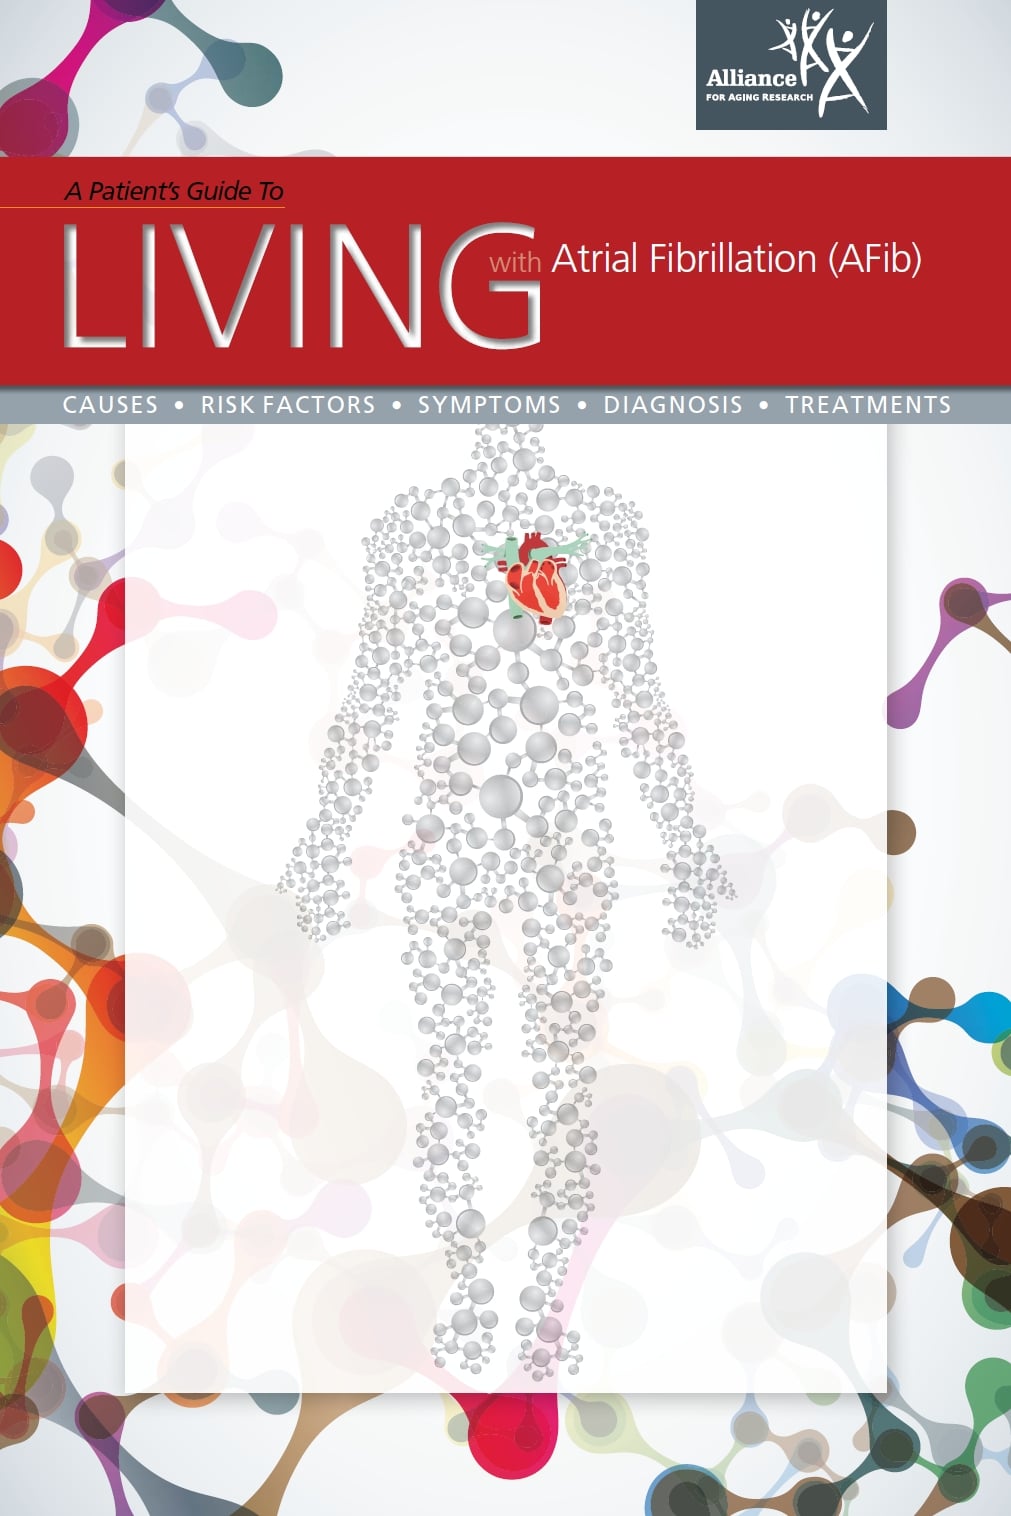 "Living with AFib" patient's guide cover.